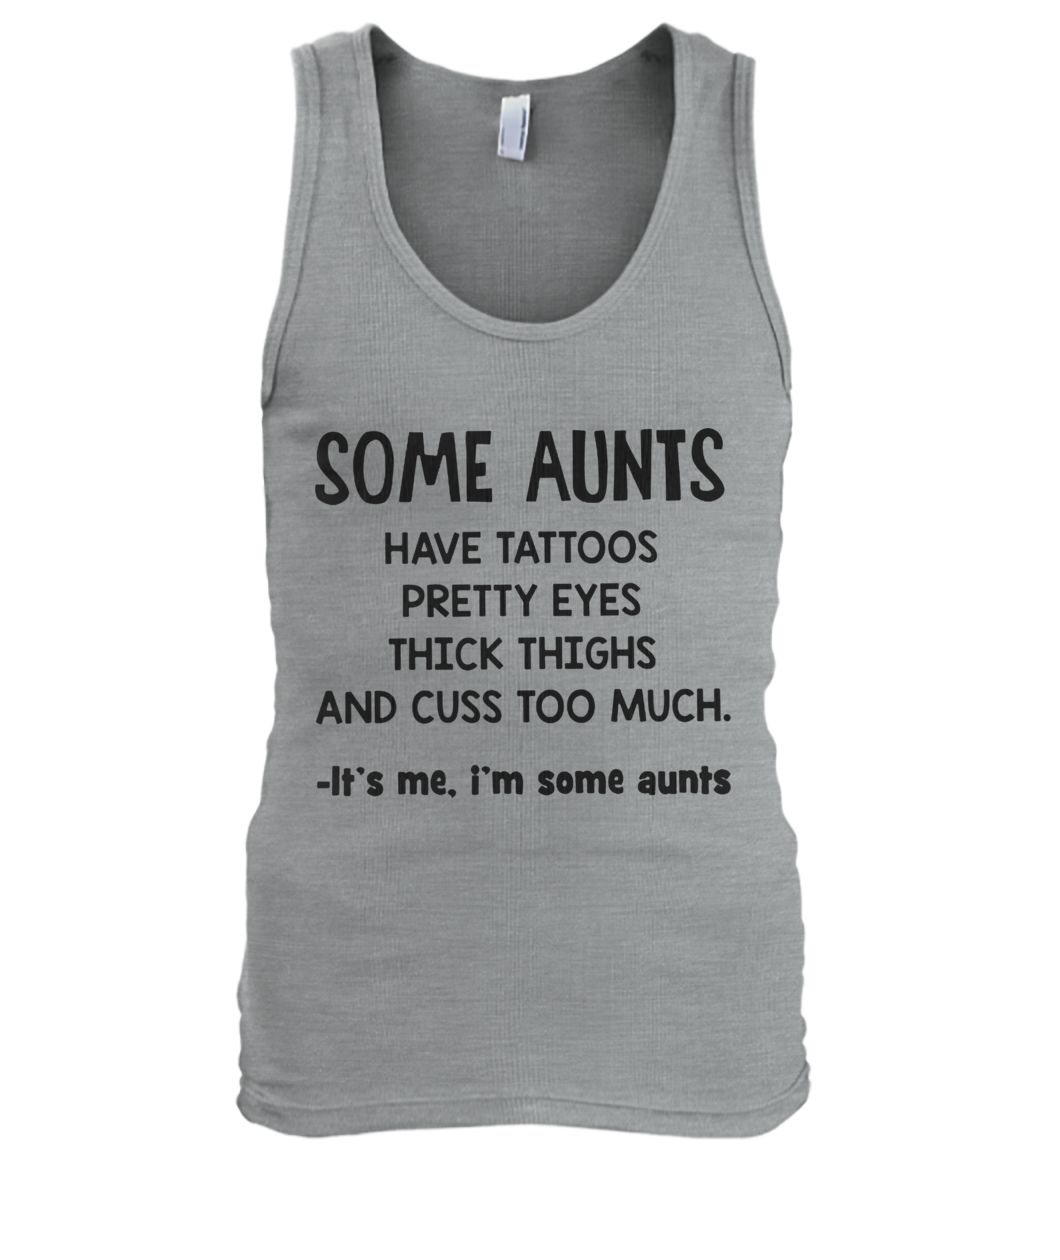 Some aunts have tattoos pretty eyes thick thighs and cuss to much men's tank top